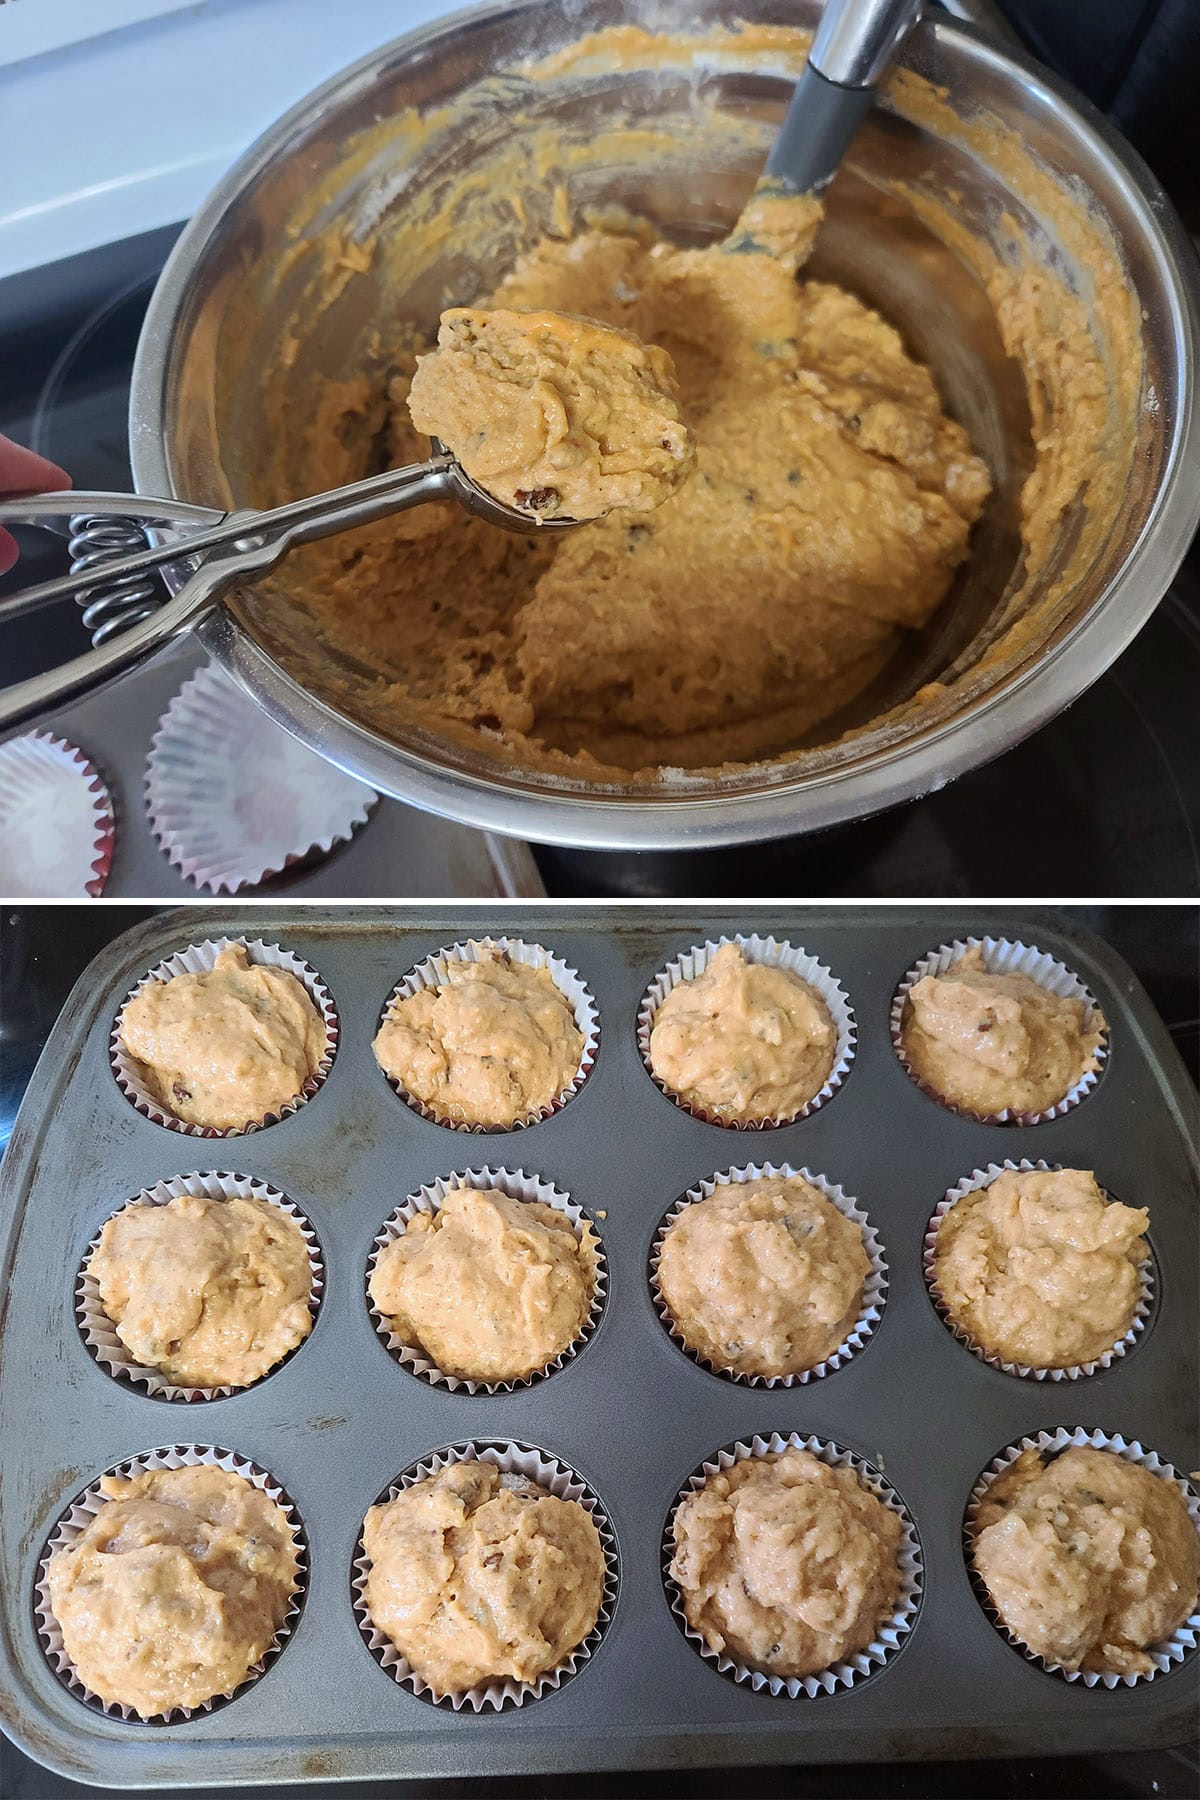 A 2 part image showing a cookie scoop being used to scoop muffin batter into the prepared pan.